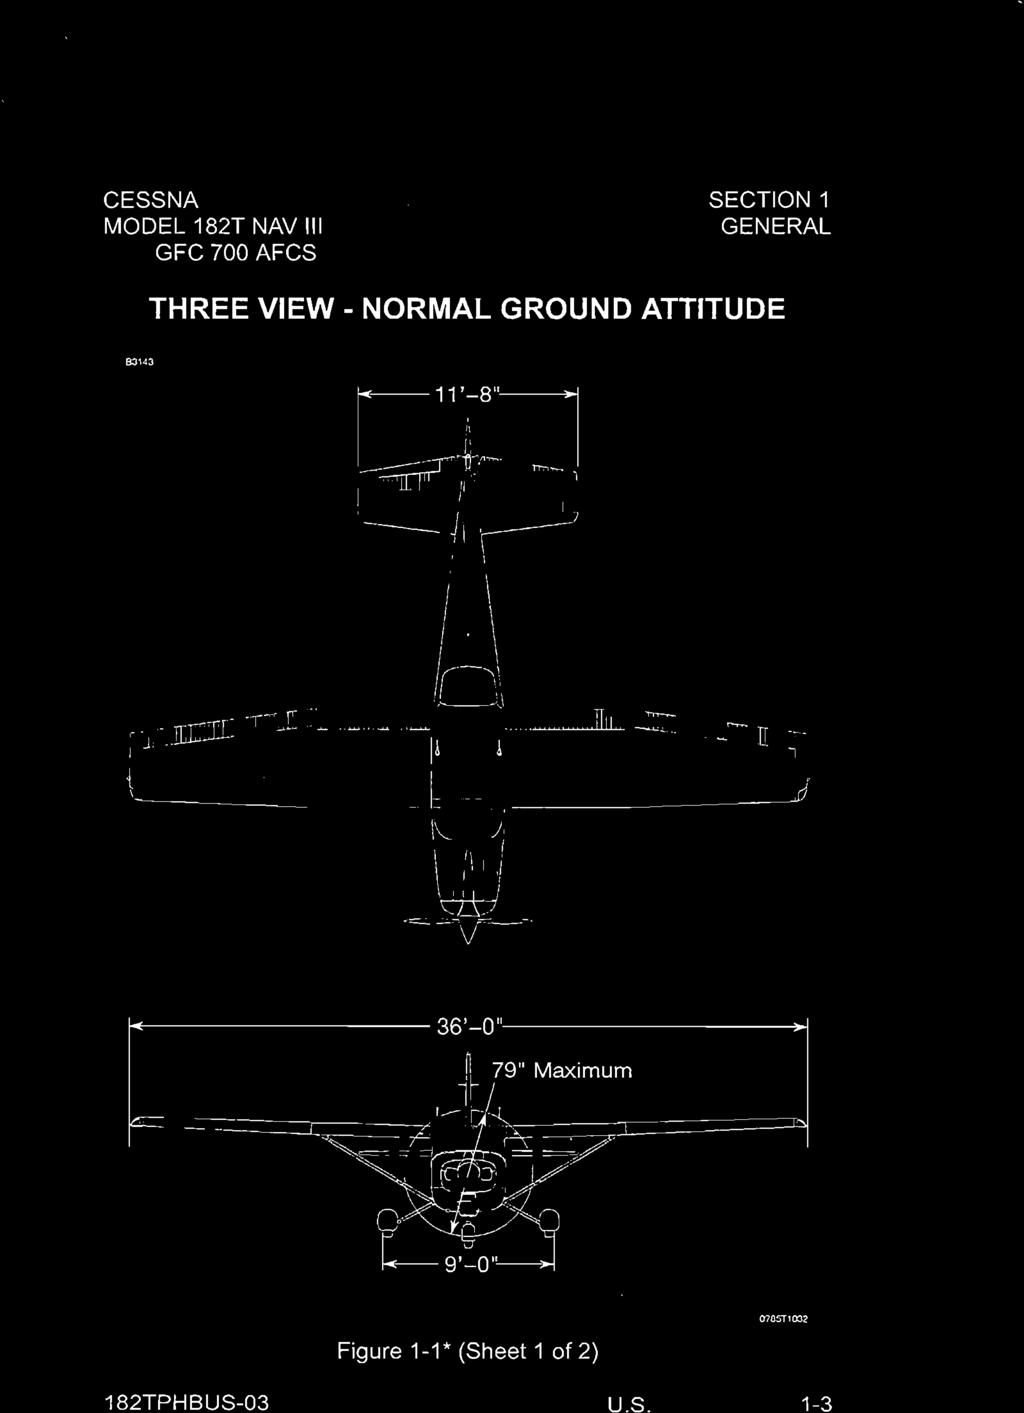 CESSNA SECTION 1 GENERAL THREE VIEW - NORMAL GROUND ATTITUDE 63143